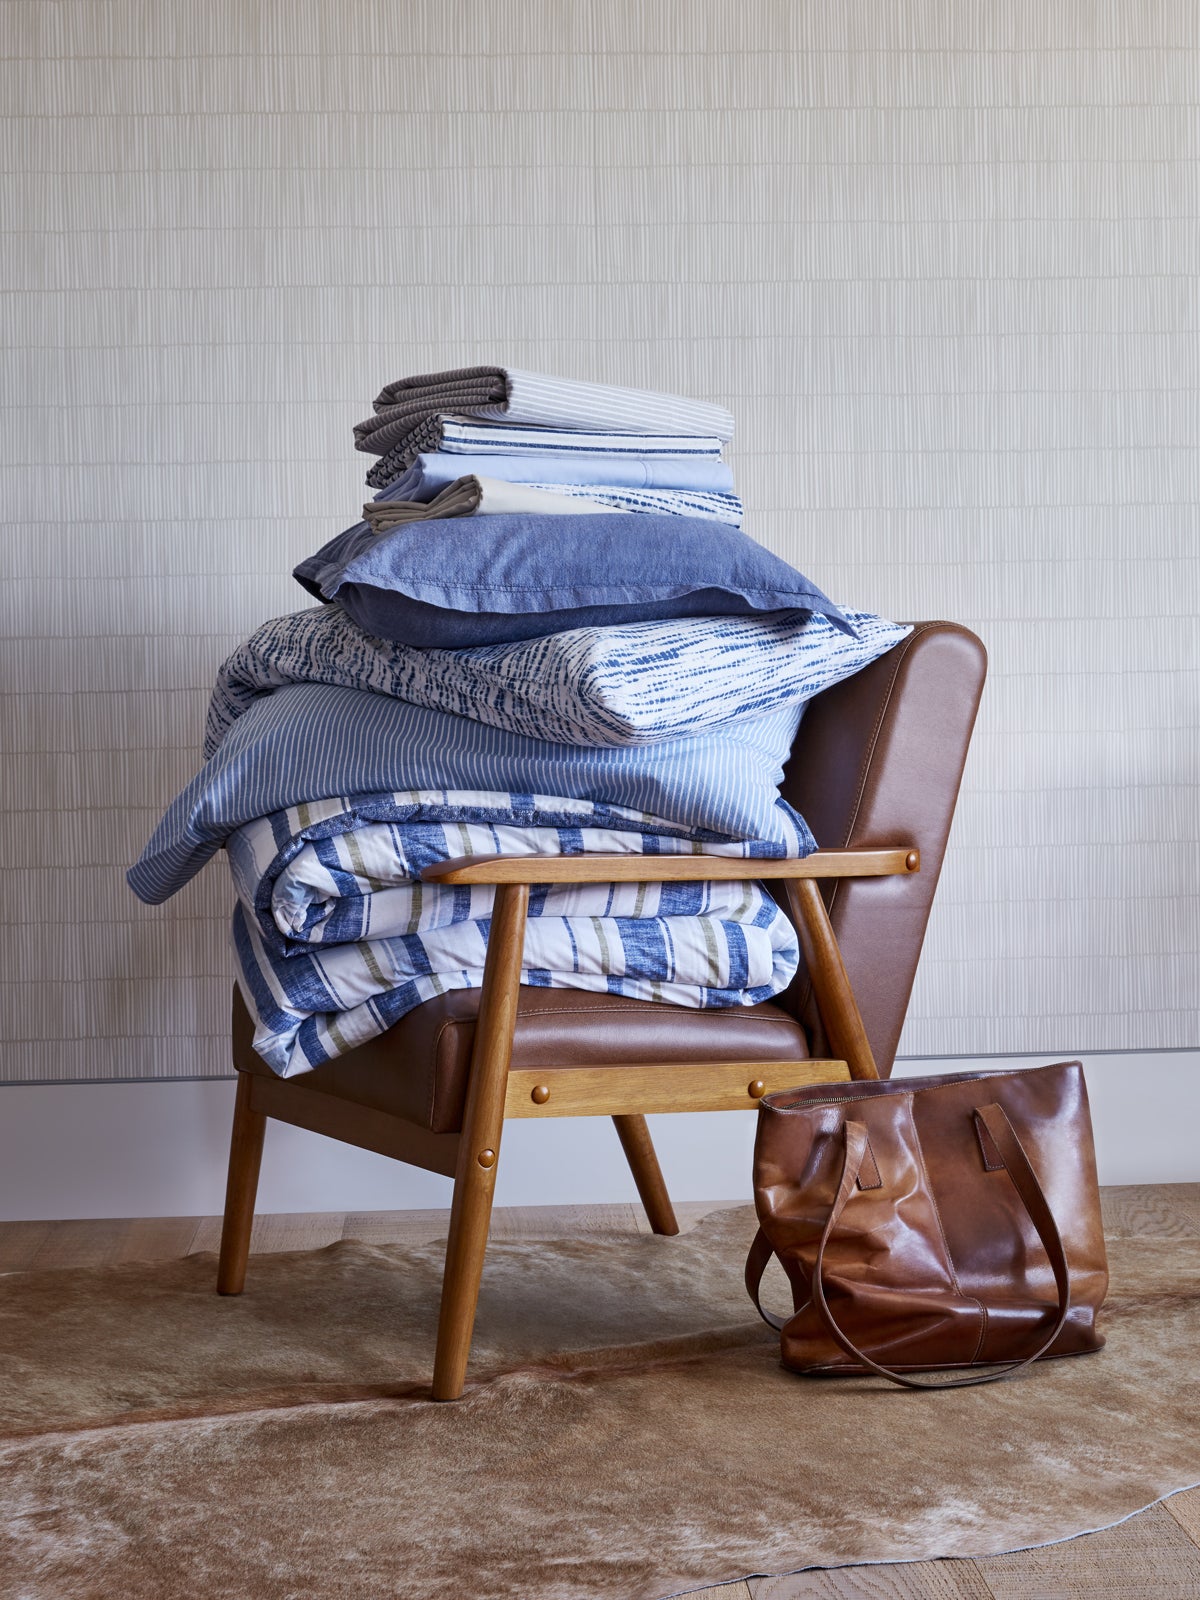 Like the Perfect White Tee, Gap’s First-Ever Home Line Is an Instant Classic